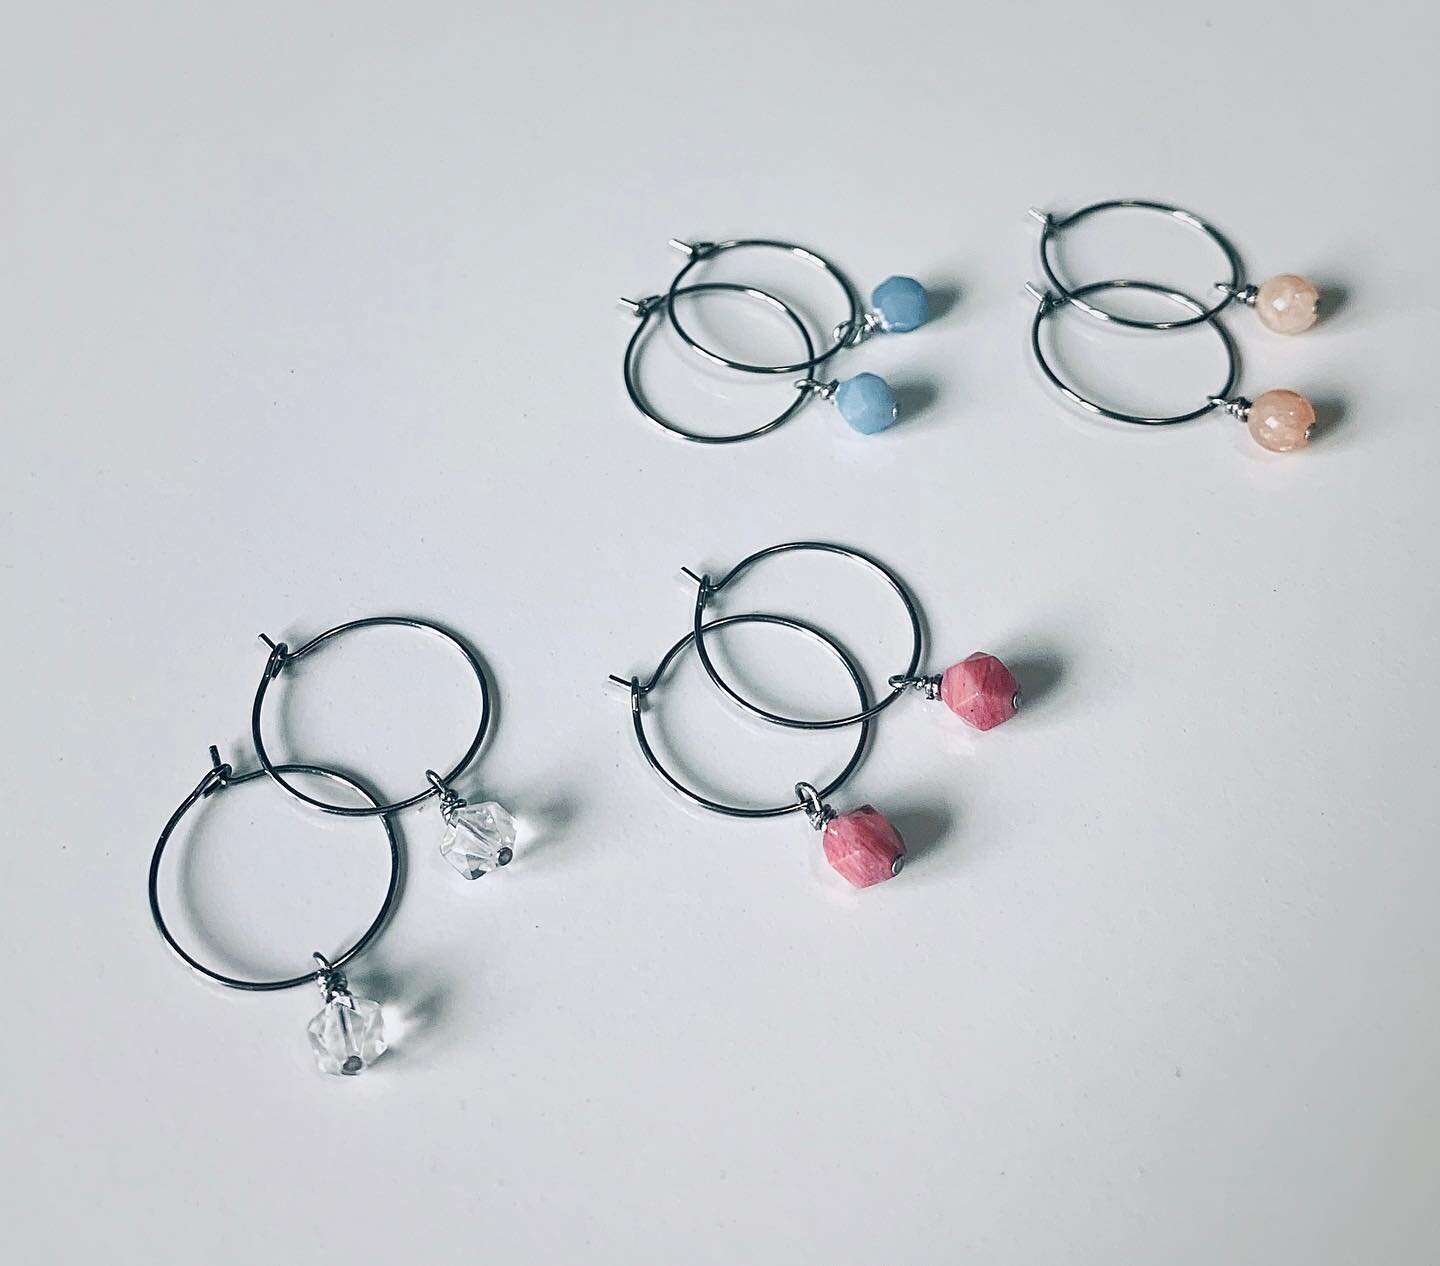 ✨NEW EARRINGS✨
&bull;
These stainless steel and gemstone cuties just hit the website ! Available options are natural clear quartz, rhodonite, moonstone, or angelite!
&bull;
Limited quantities available so checkout the website to treat yourself before